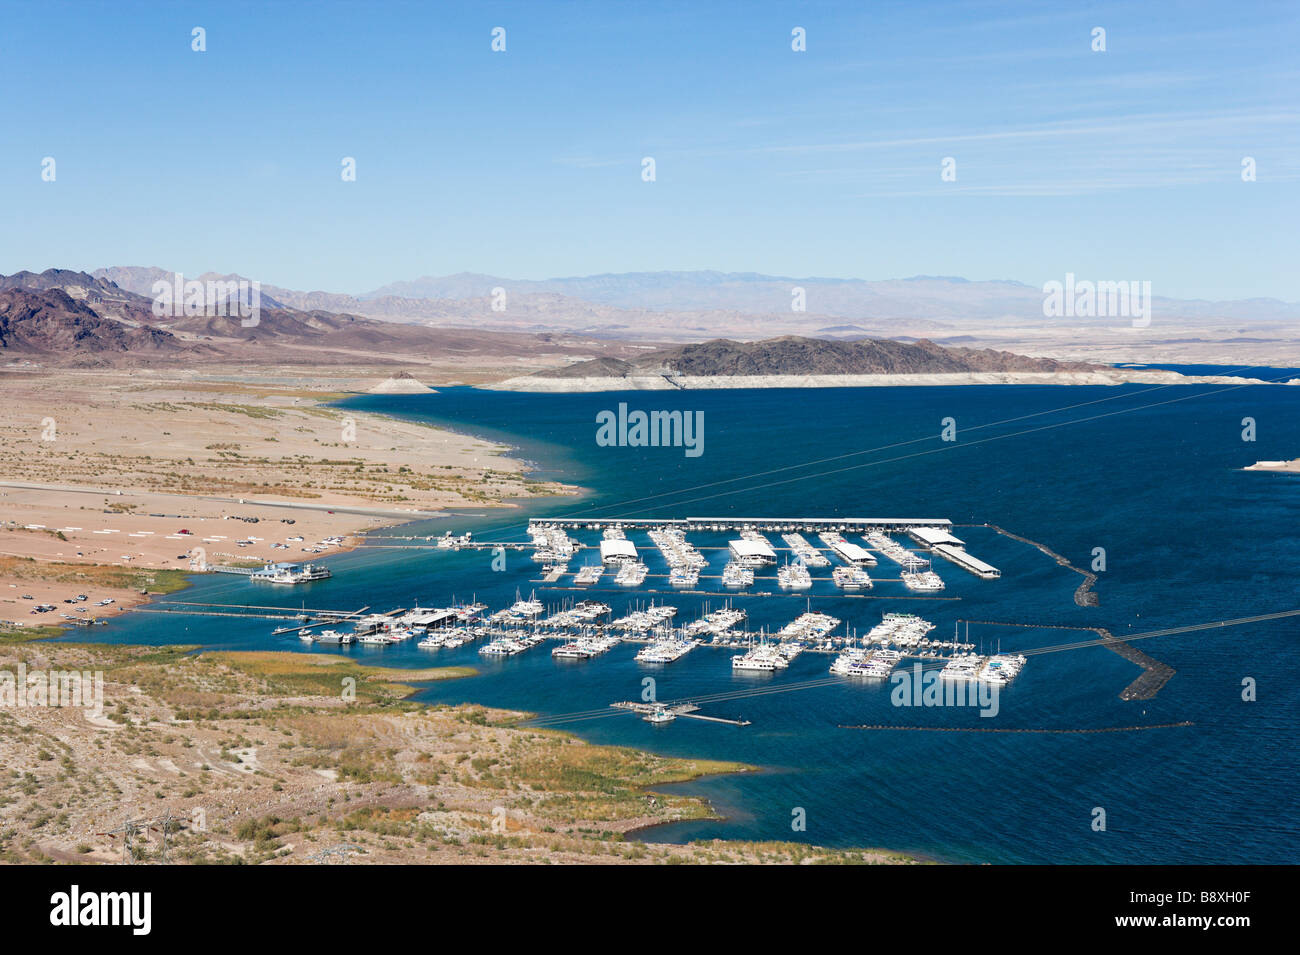 View of Las Vegas Boat Harbor from Lakeview Overlook near the Hoover Dam, Lake Mead, Nevada, USA Stock Photo